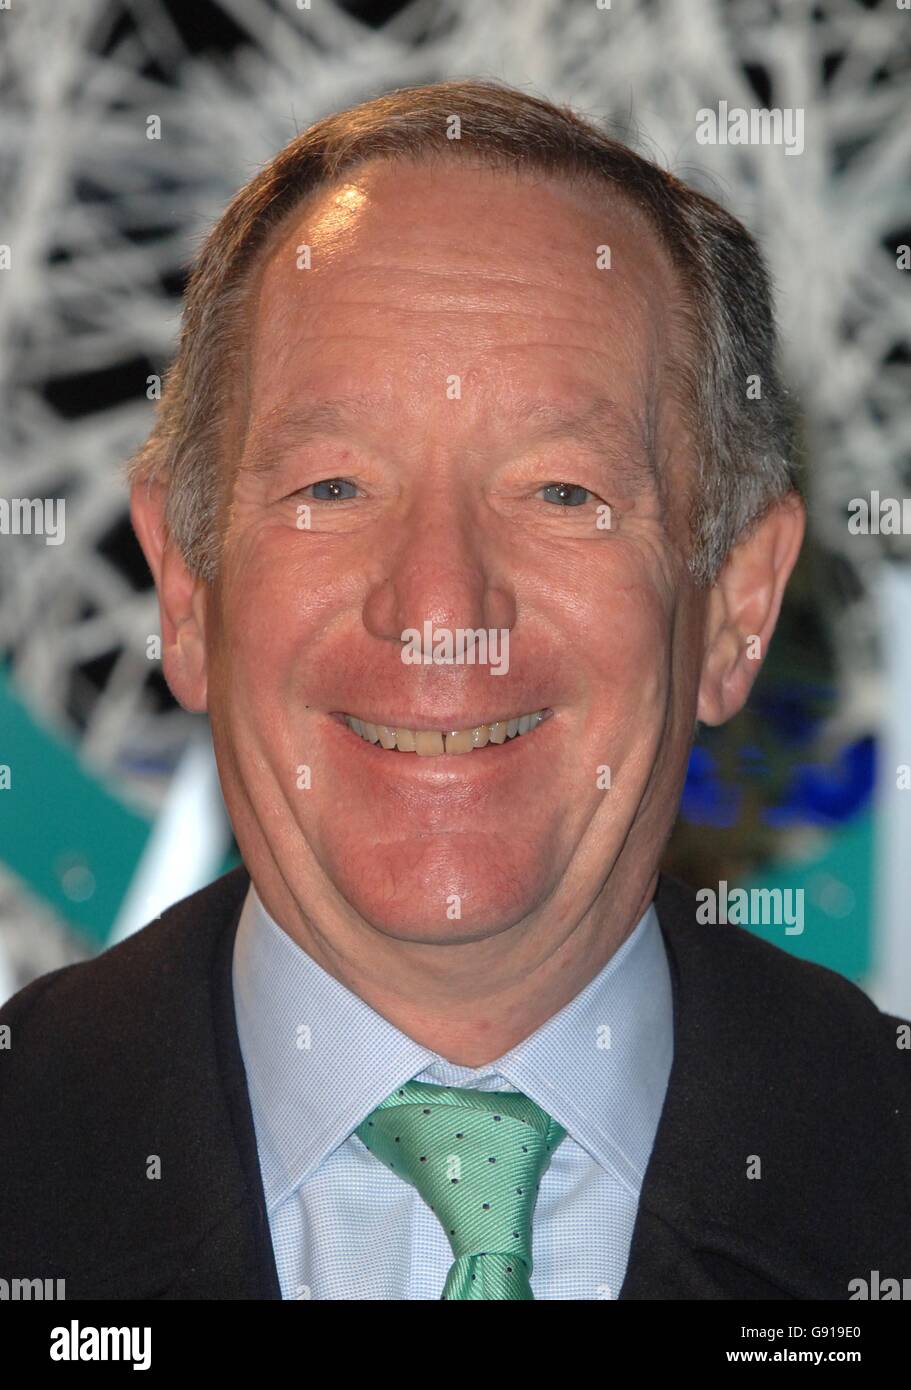 Michael Buerk arrives for the '2005 TV Moments' show, at the BBC TV Centre, west London, Tuesday 29 November 2005. PRESS ASSOCIATION Photo. Photo credit should read: Ian West/PA Stock Photo